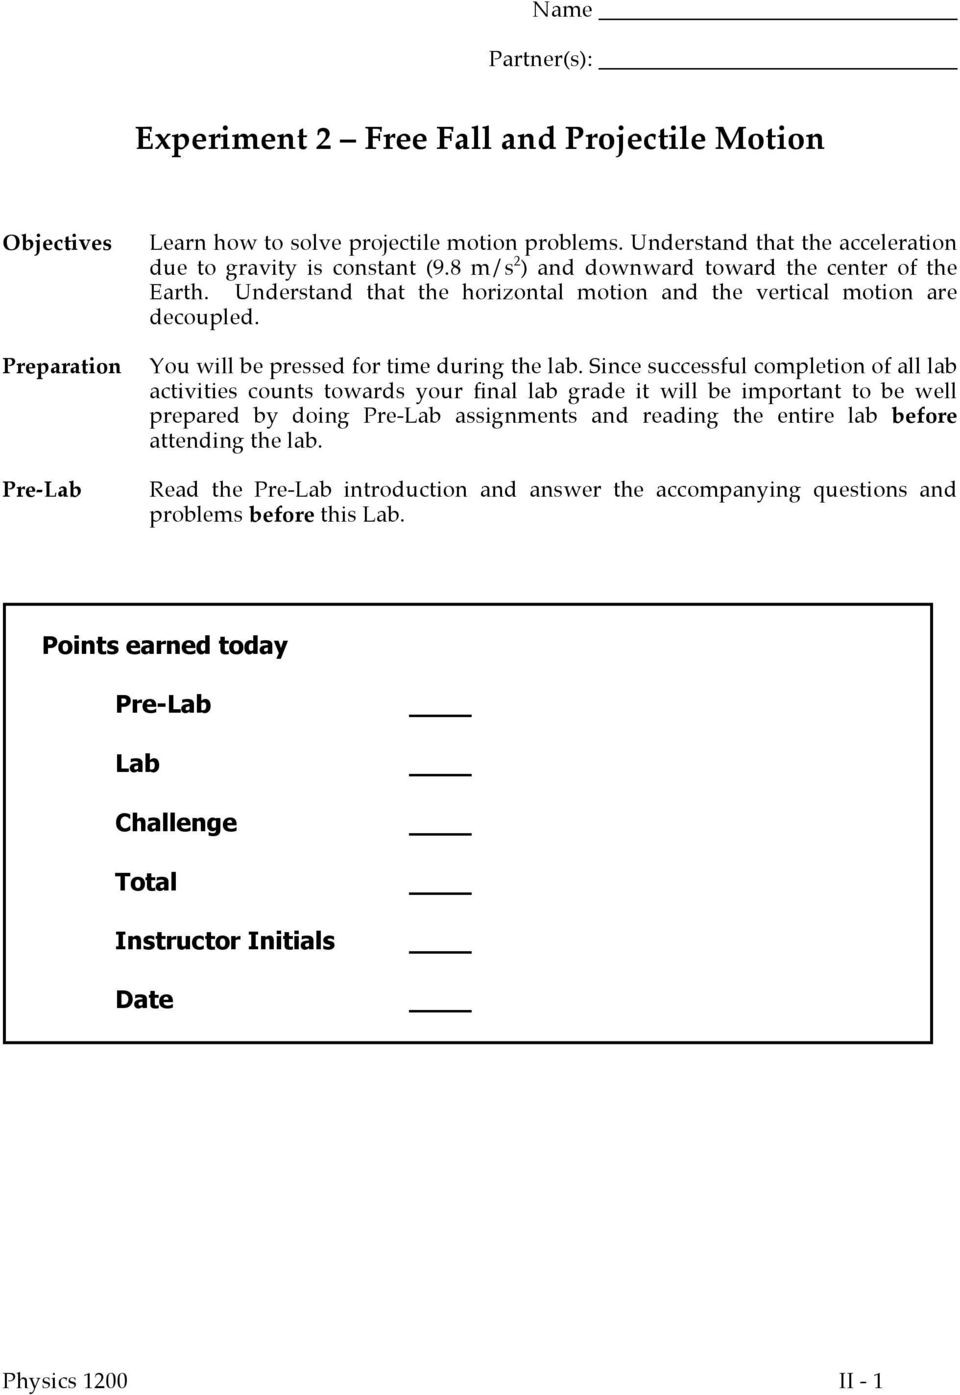 Free Fall Problems Worksheet Experiment 2 Free Fall and Projectile Motion Pdf Free Download